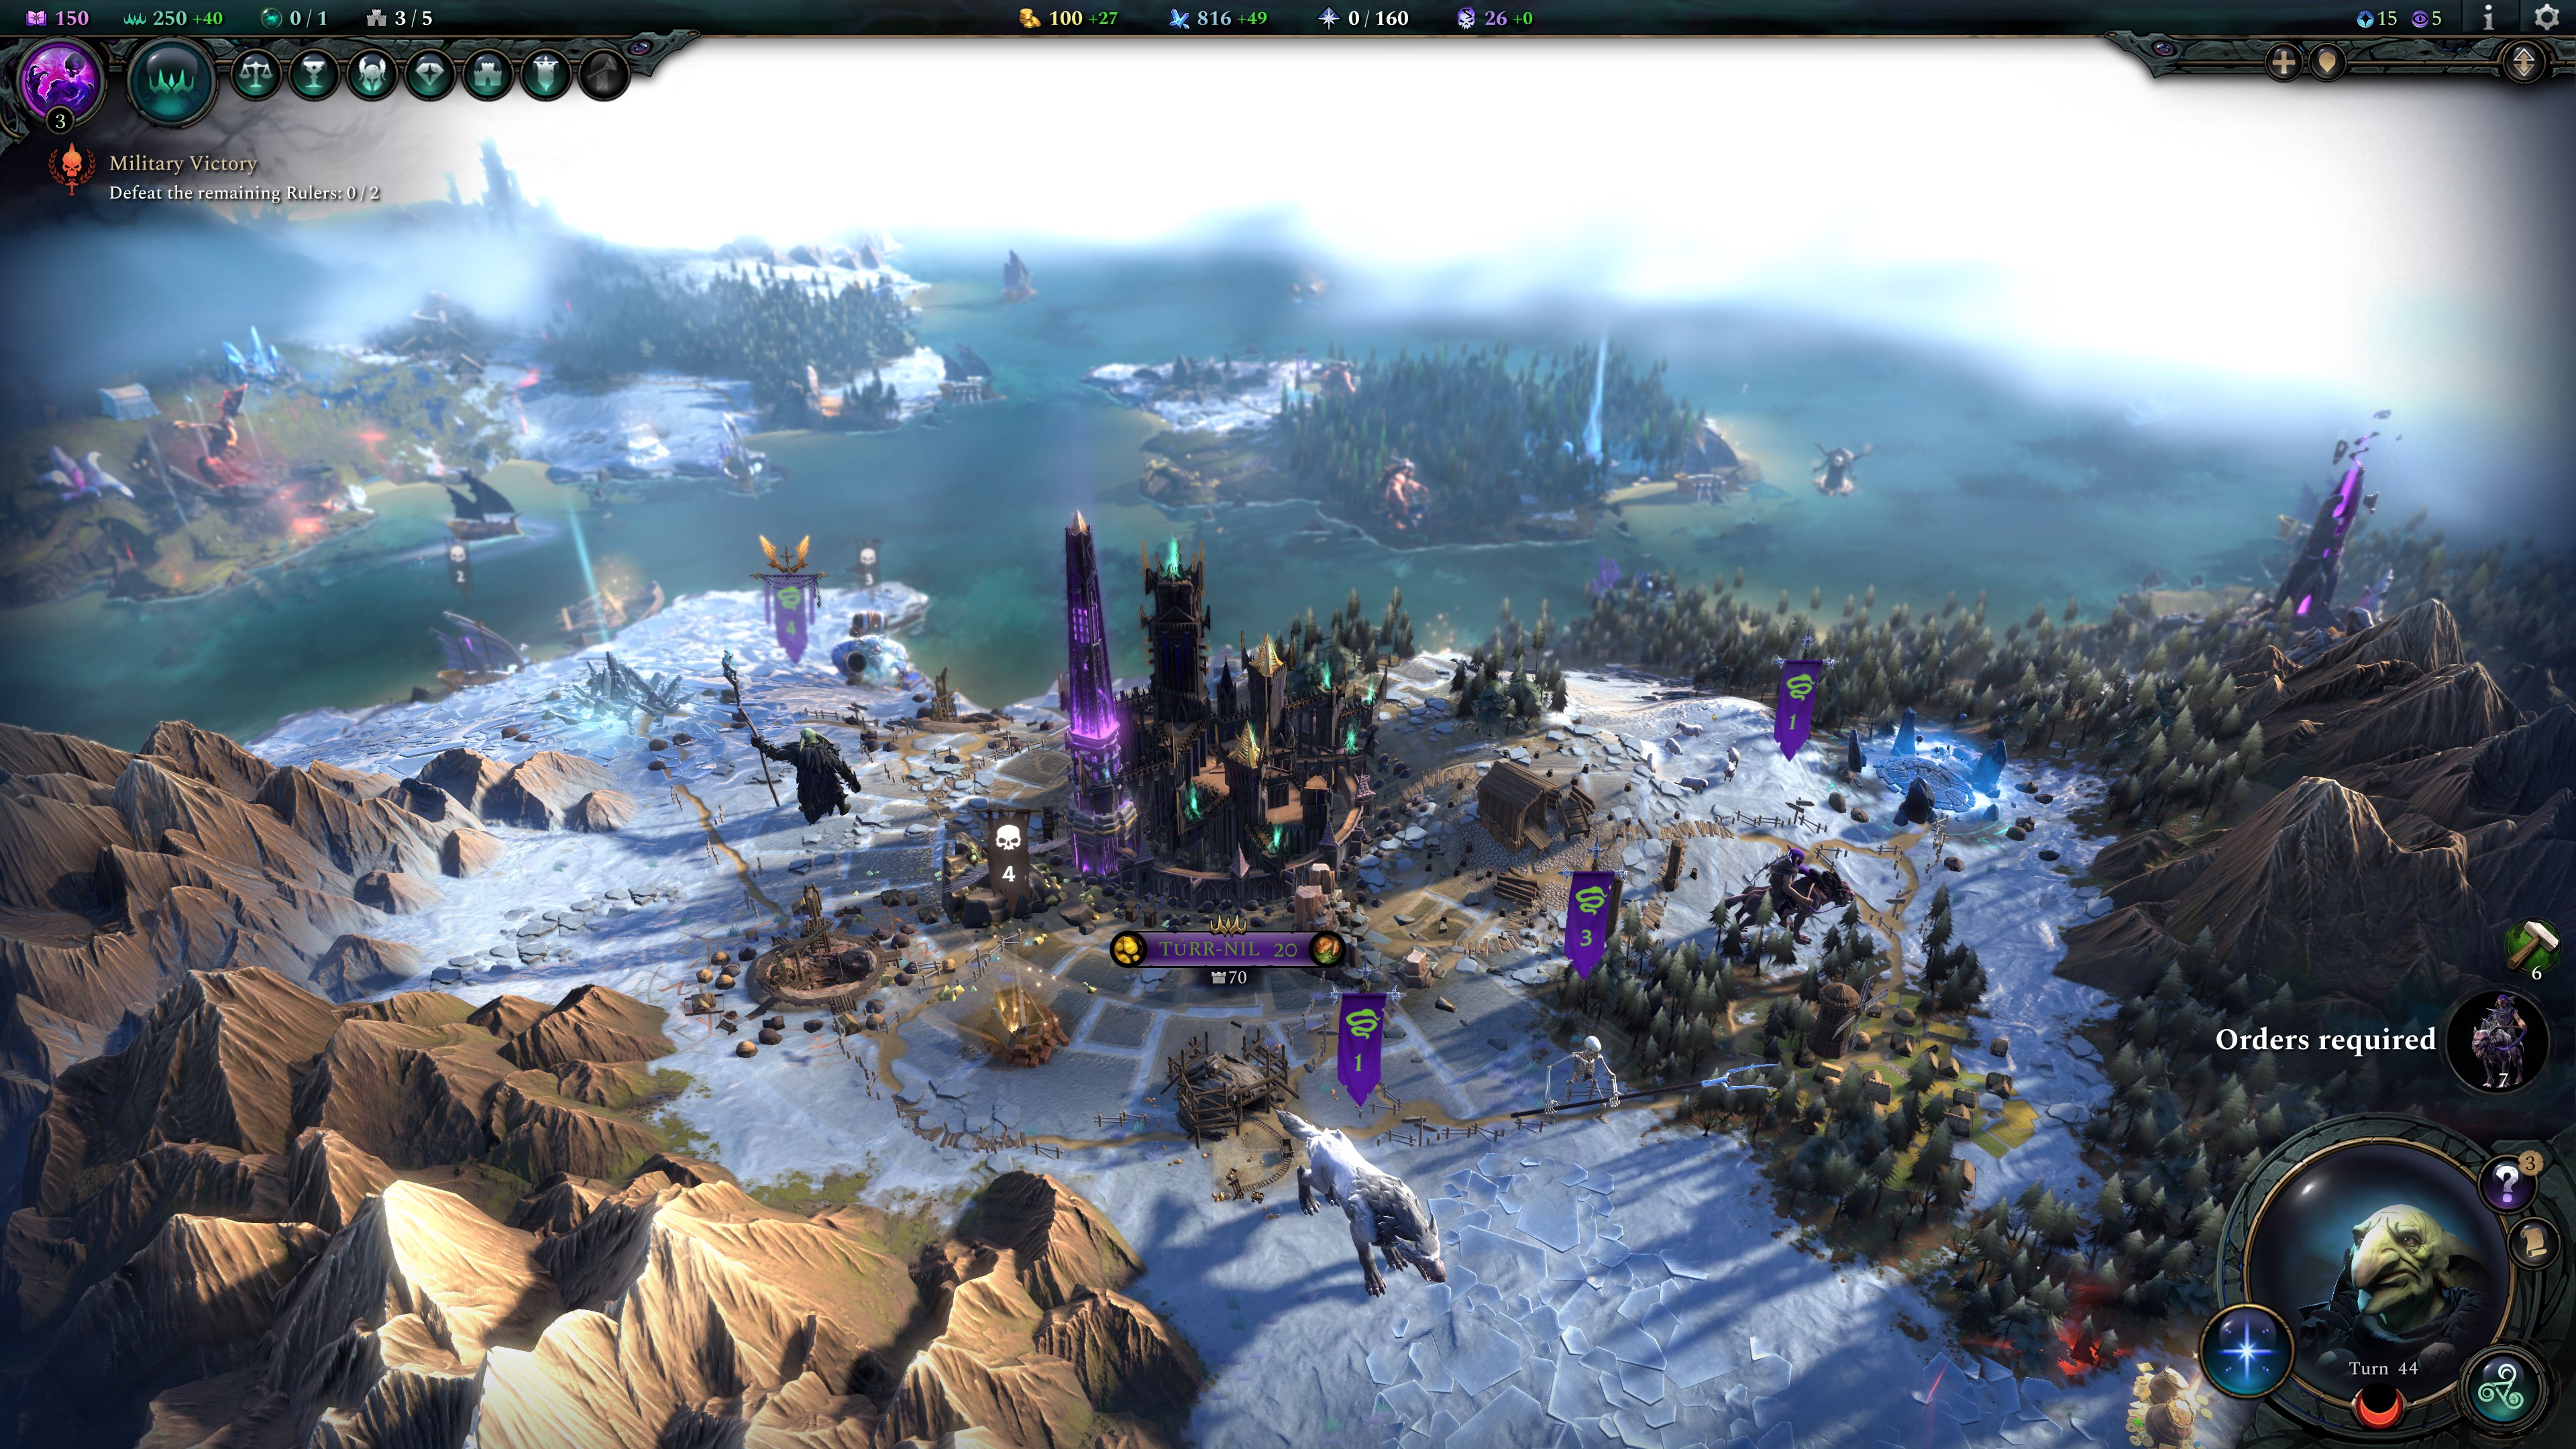 Wonder of the point. Age of Wonders (игра). Age of Wonders 4. Age of Wonders 1 (игра). Age of Wonders 3.